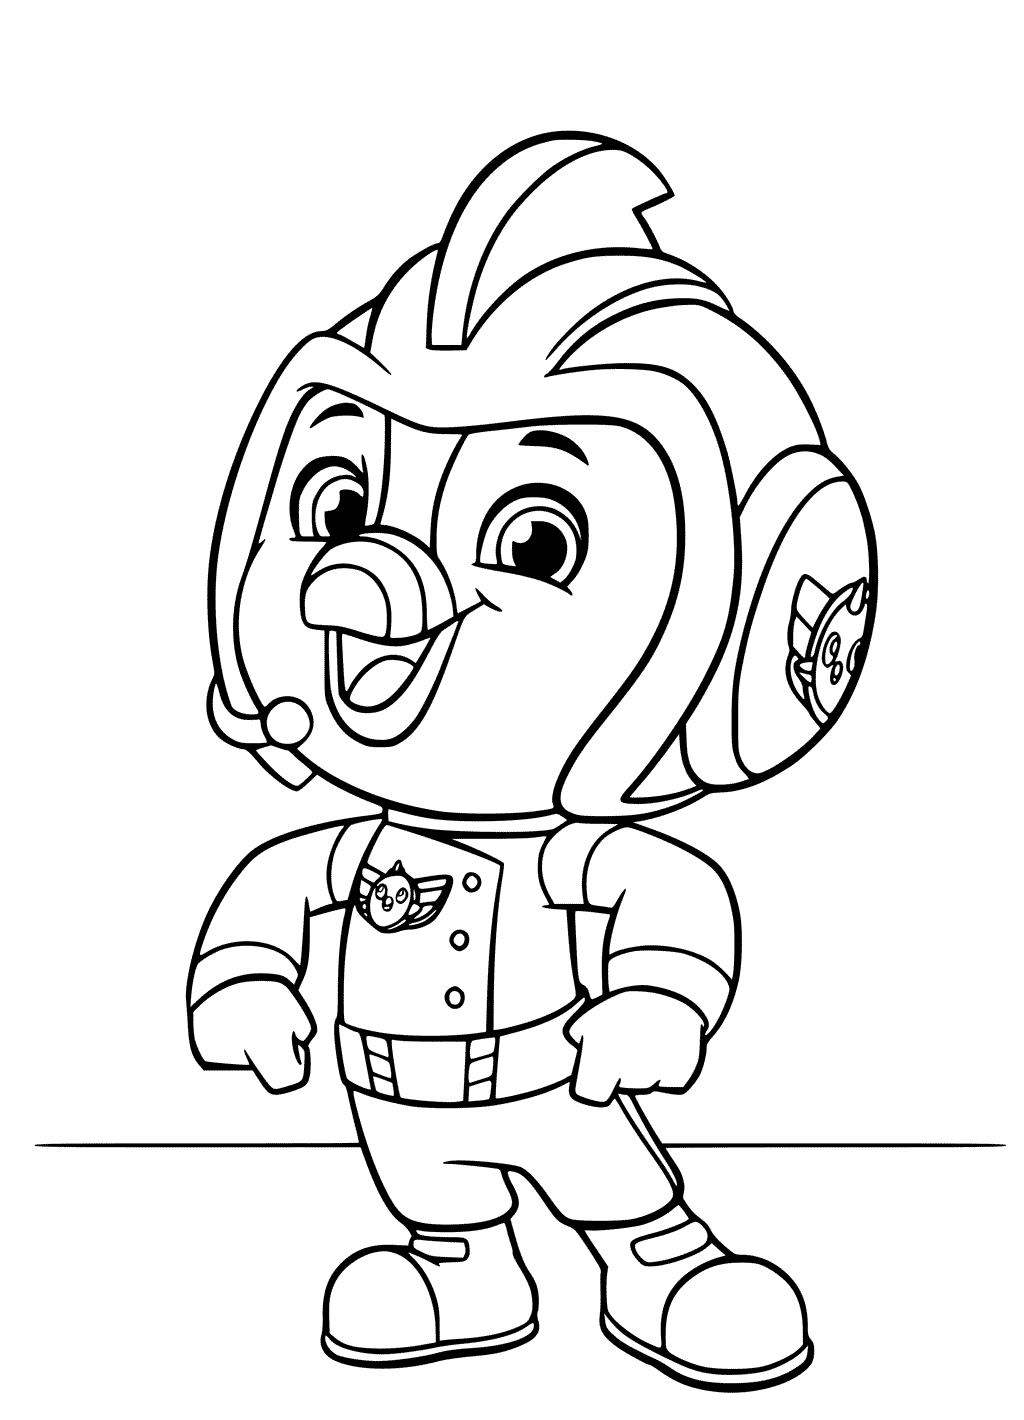 Brody Puffin Coloring Page